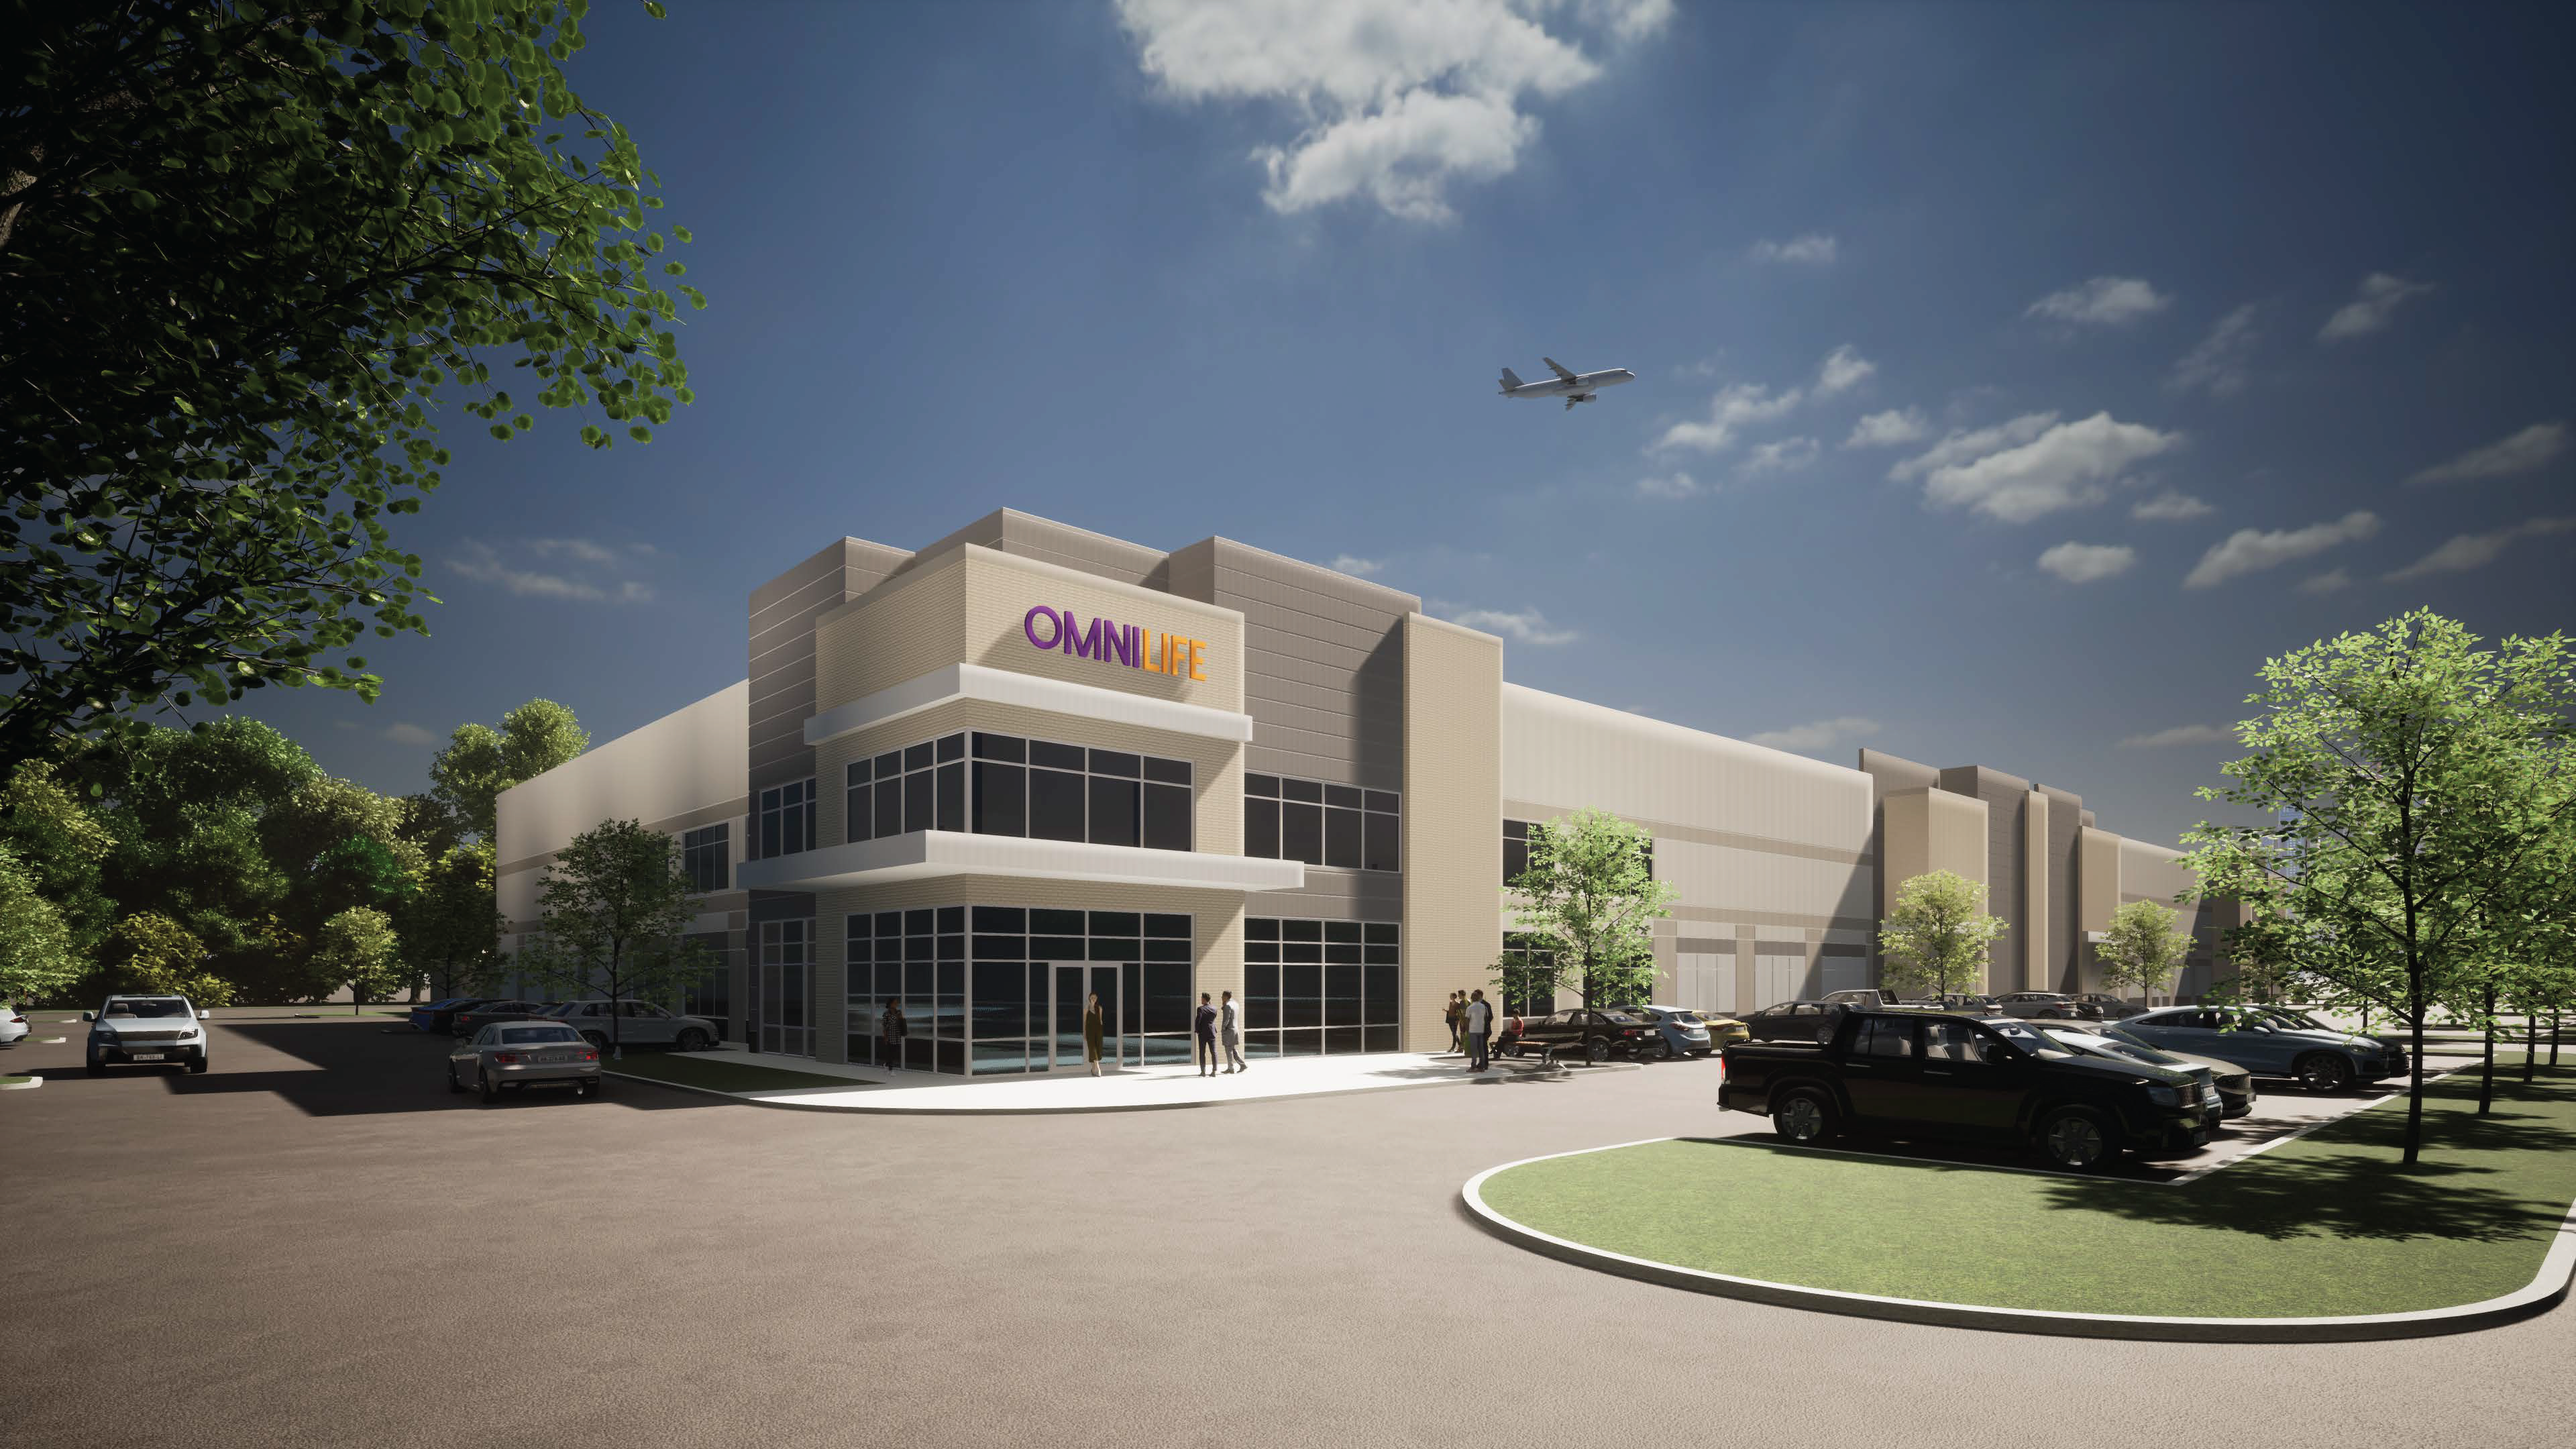 Nutritional Supplements Firm Omnilife to Put US Headquarters in New Allen Business Park